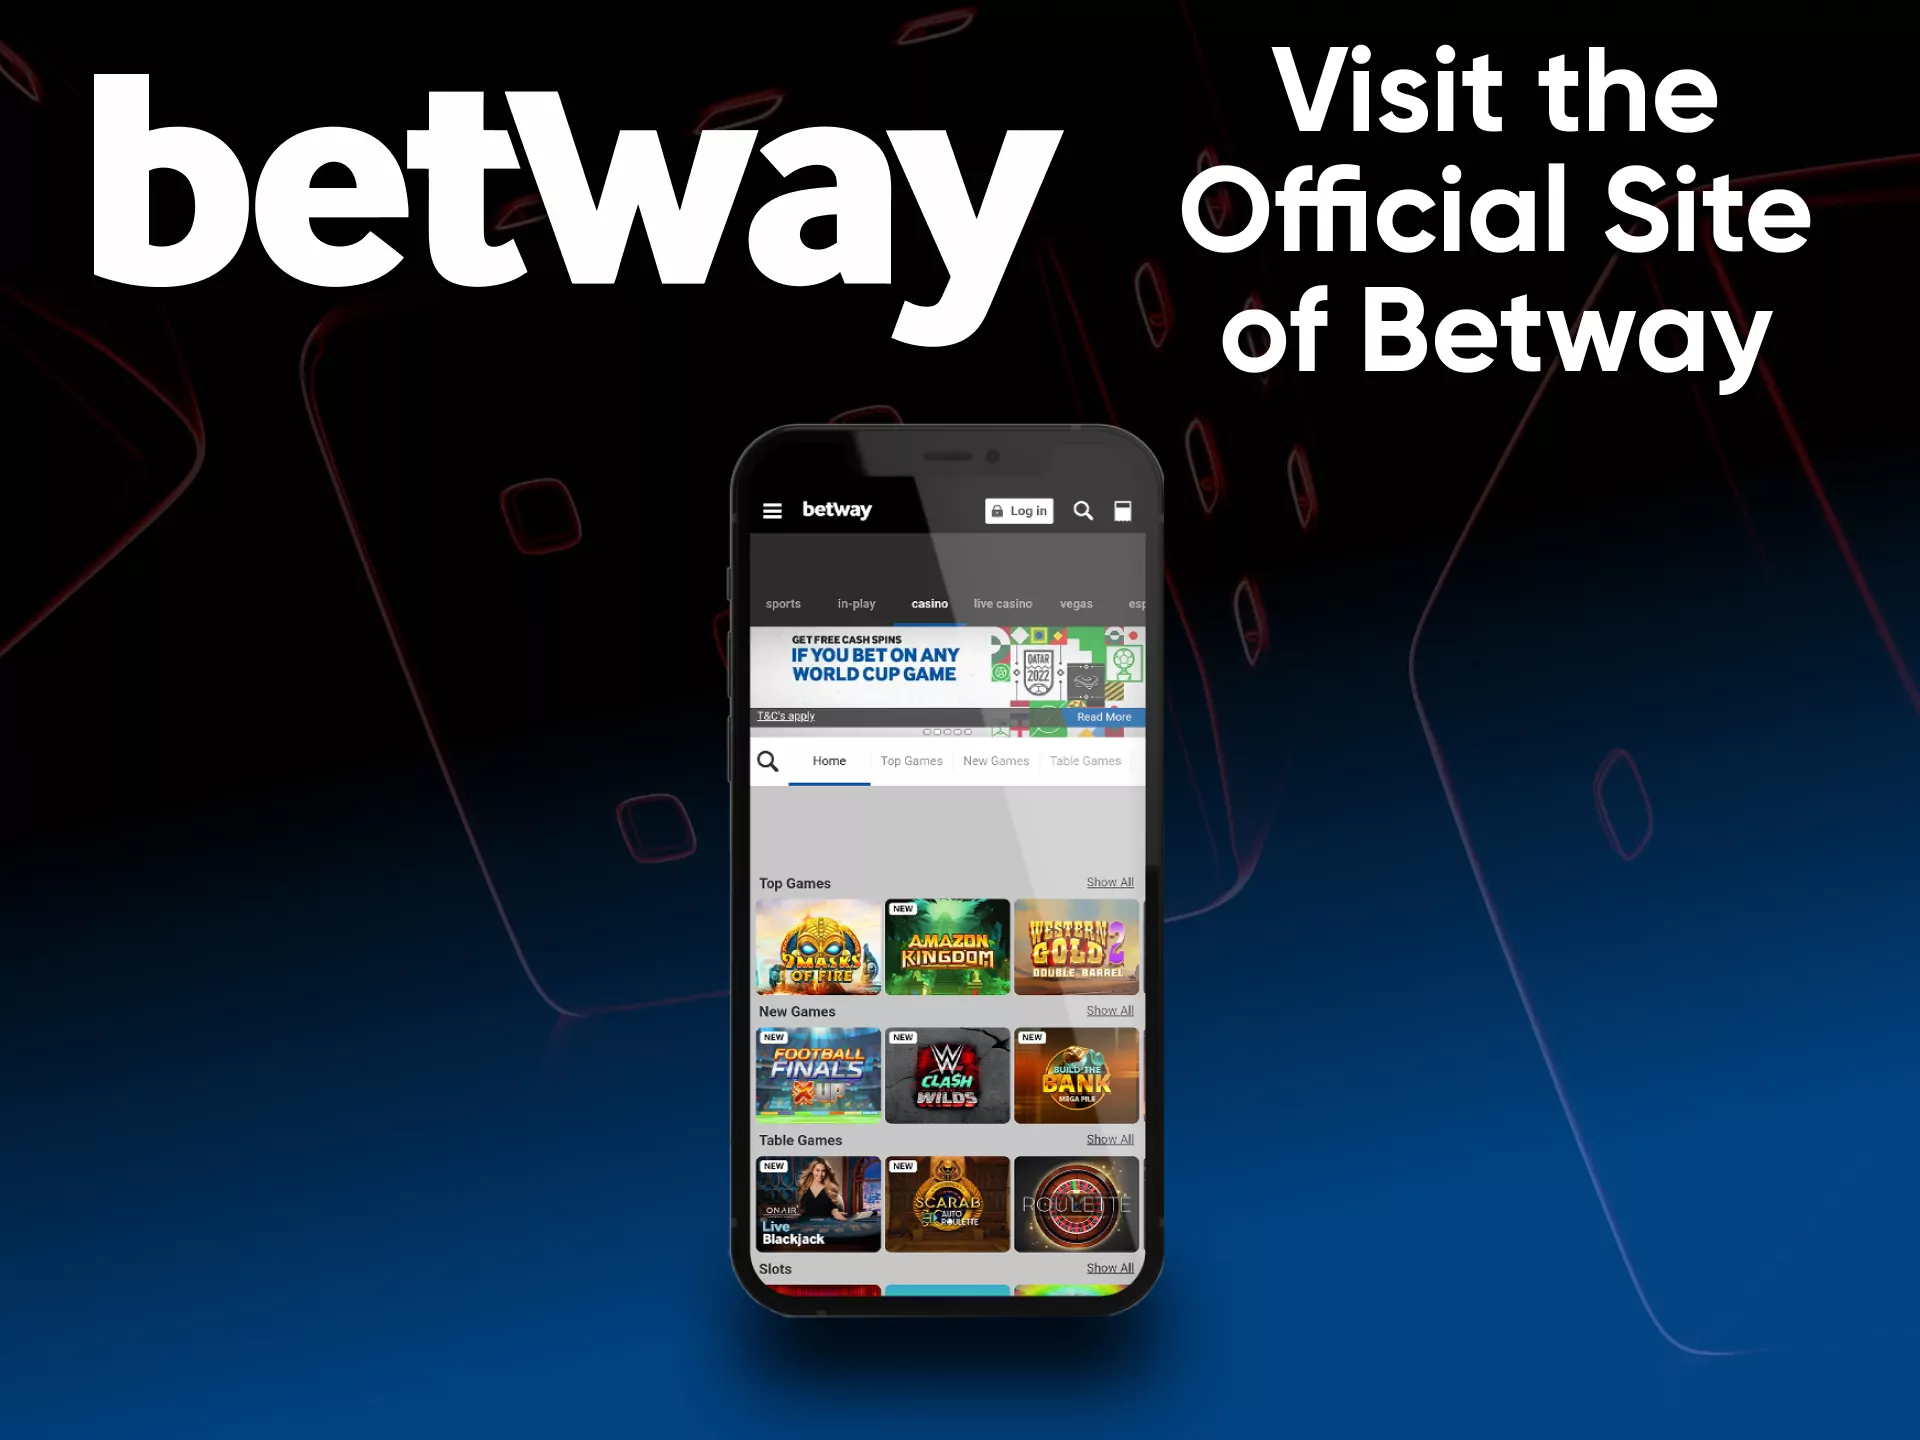 Play the Betway casino on the official site.